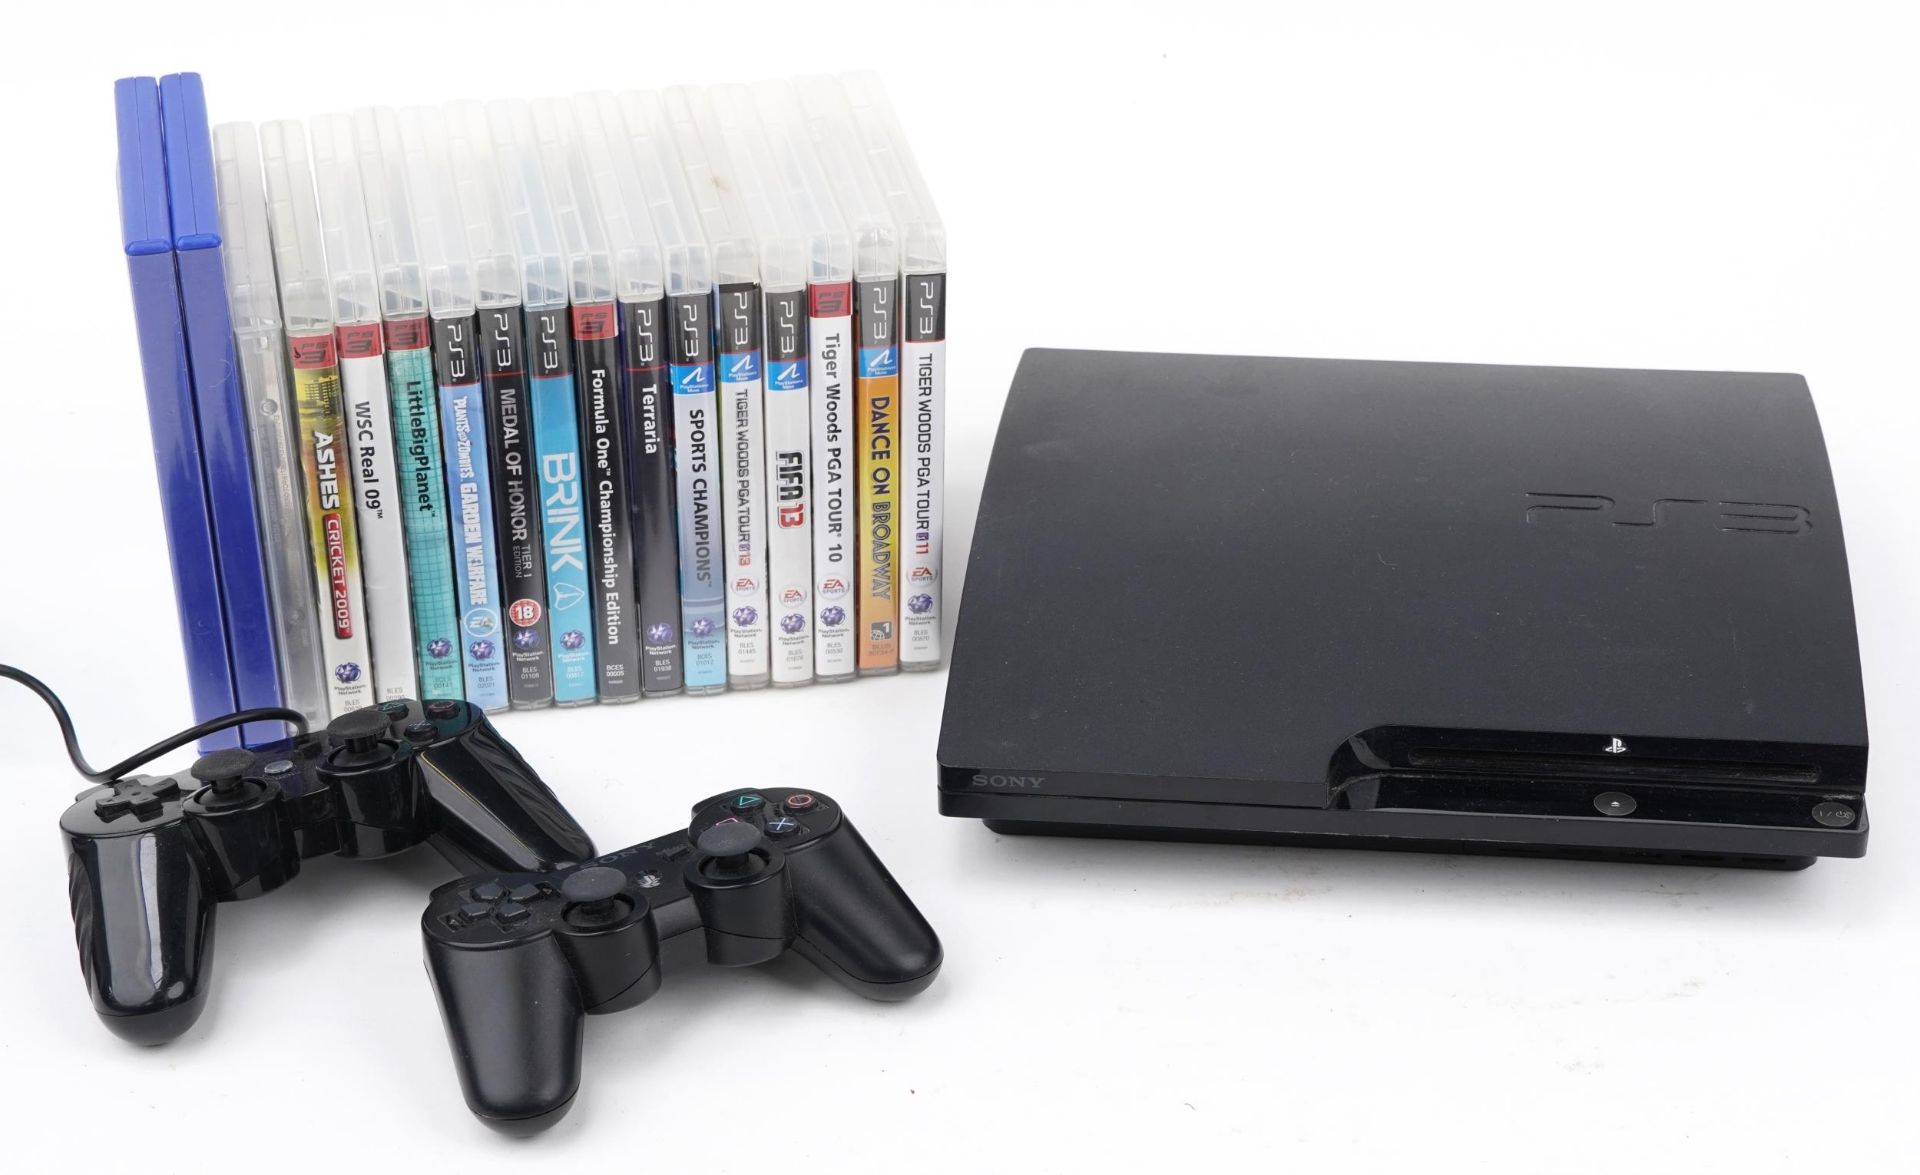 Sony PlayStation 3 games console with controllers and collection of games